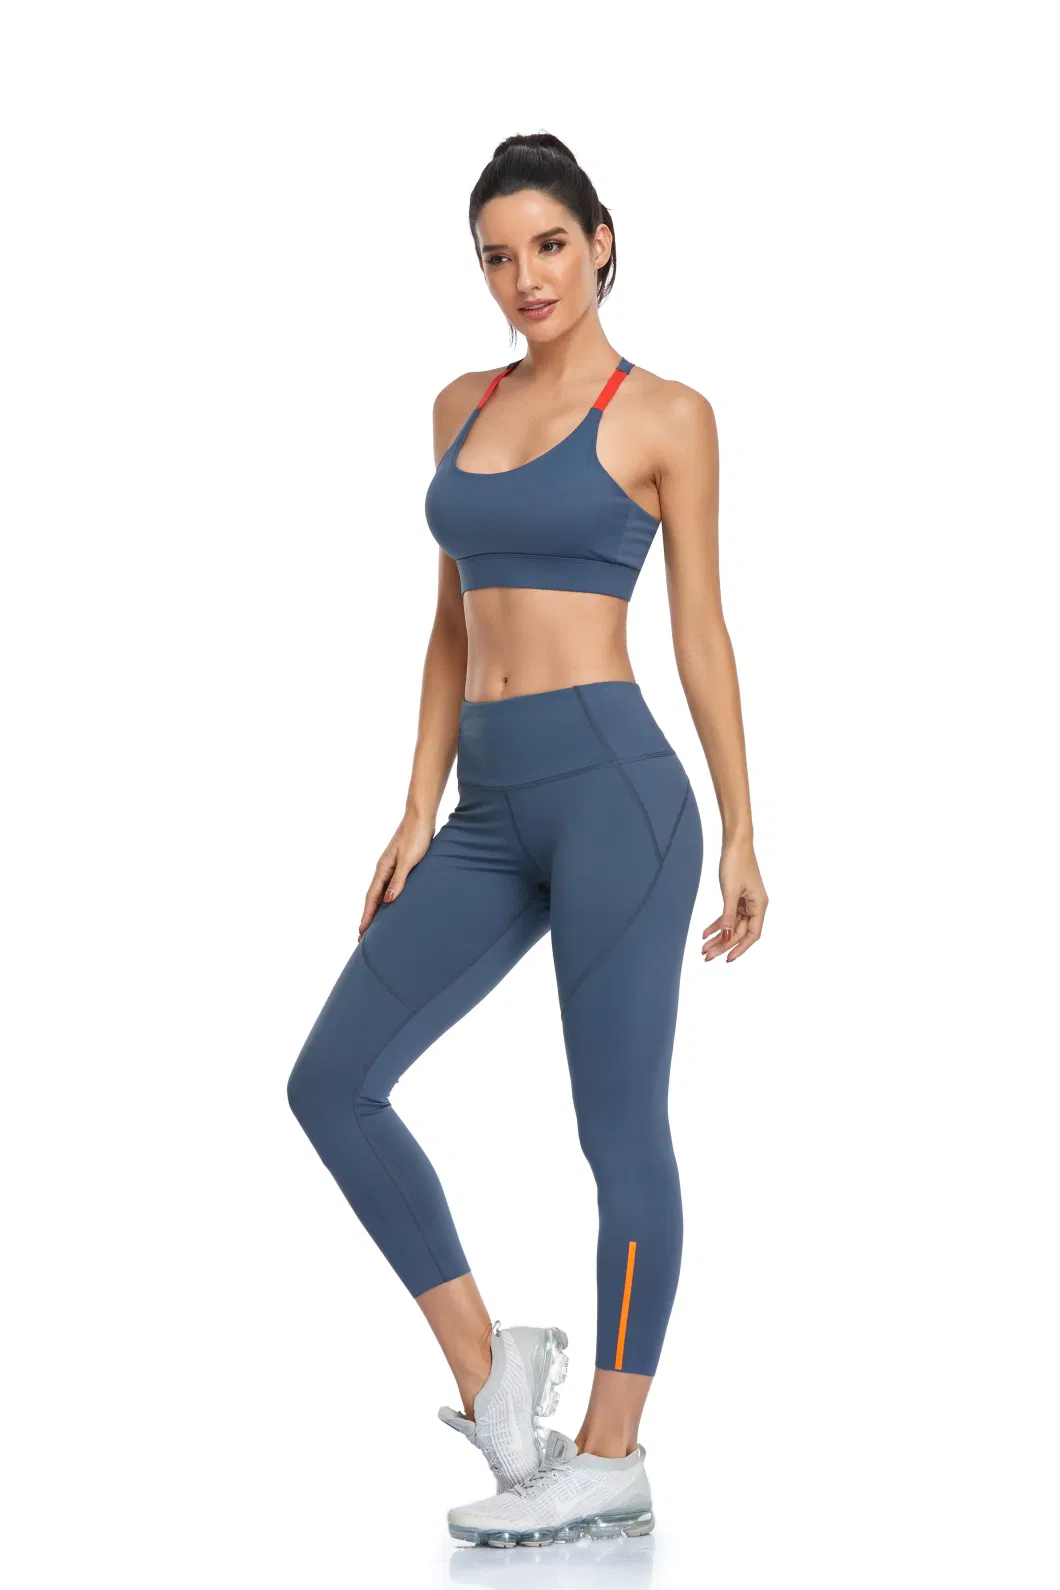 Plus Size Yoga Clothes Female High-End Professional Influencer Fitness Sports Suit Fast Dry Gym Fashion Running Yoga Wear